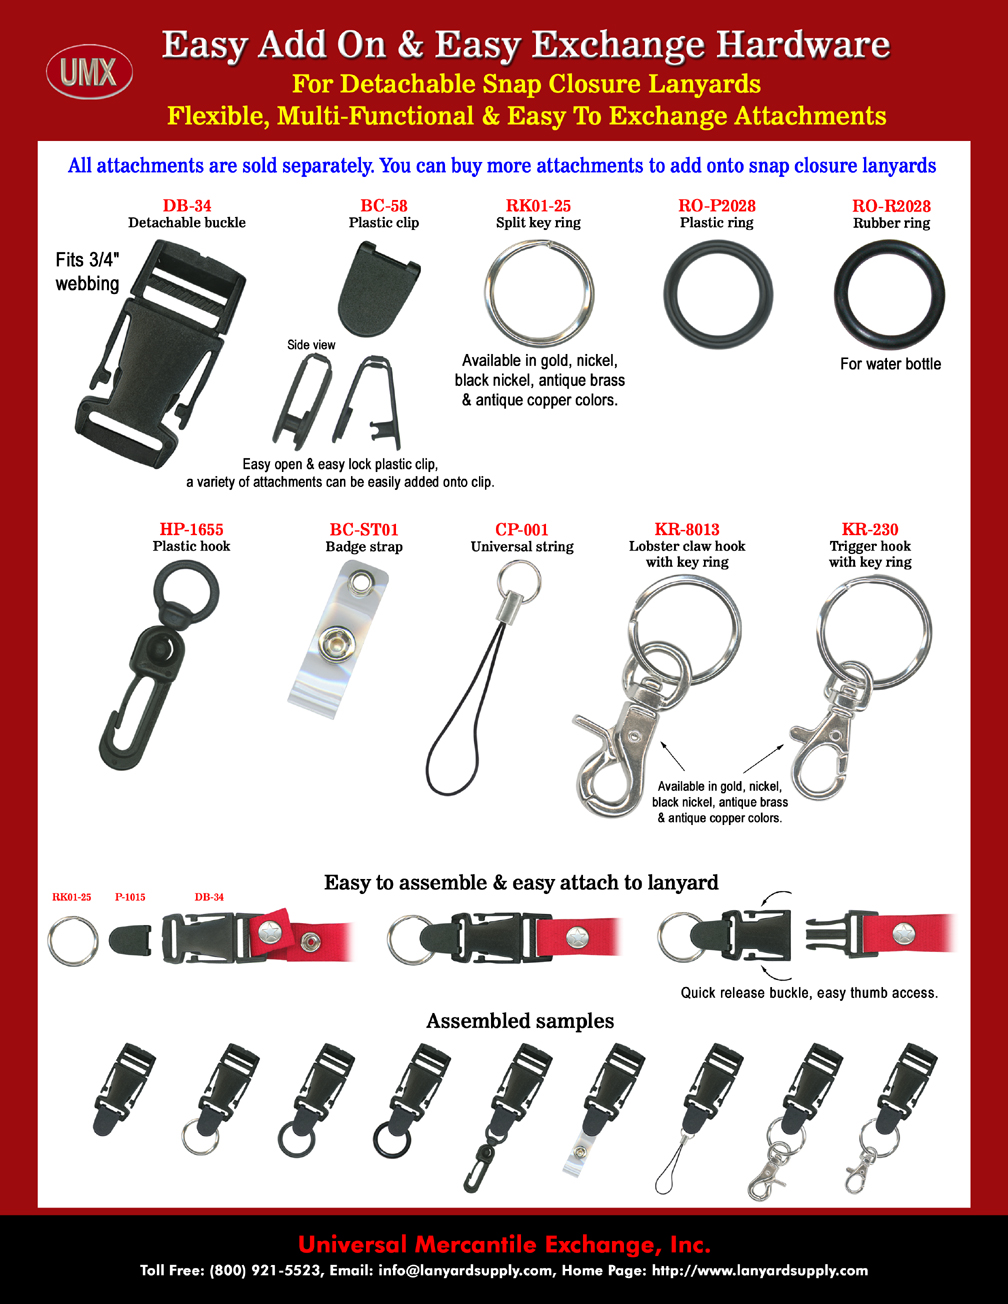 Exchangeable and Flexible Easy-Add-On Hardware For 3/4" Snap-On Lanyards